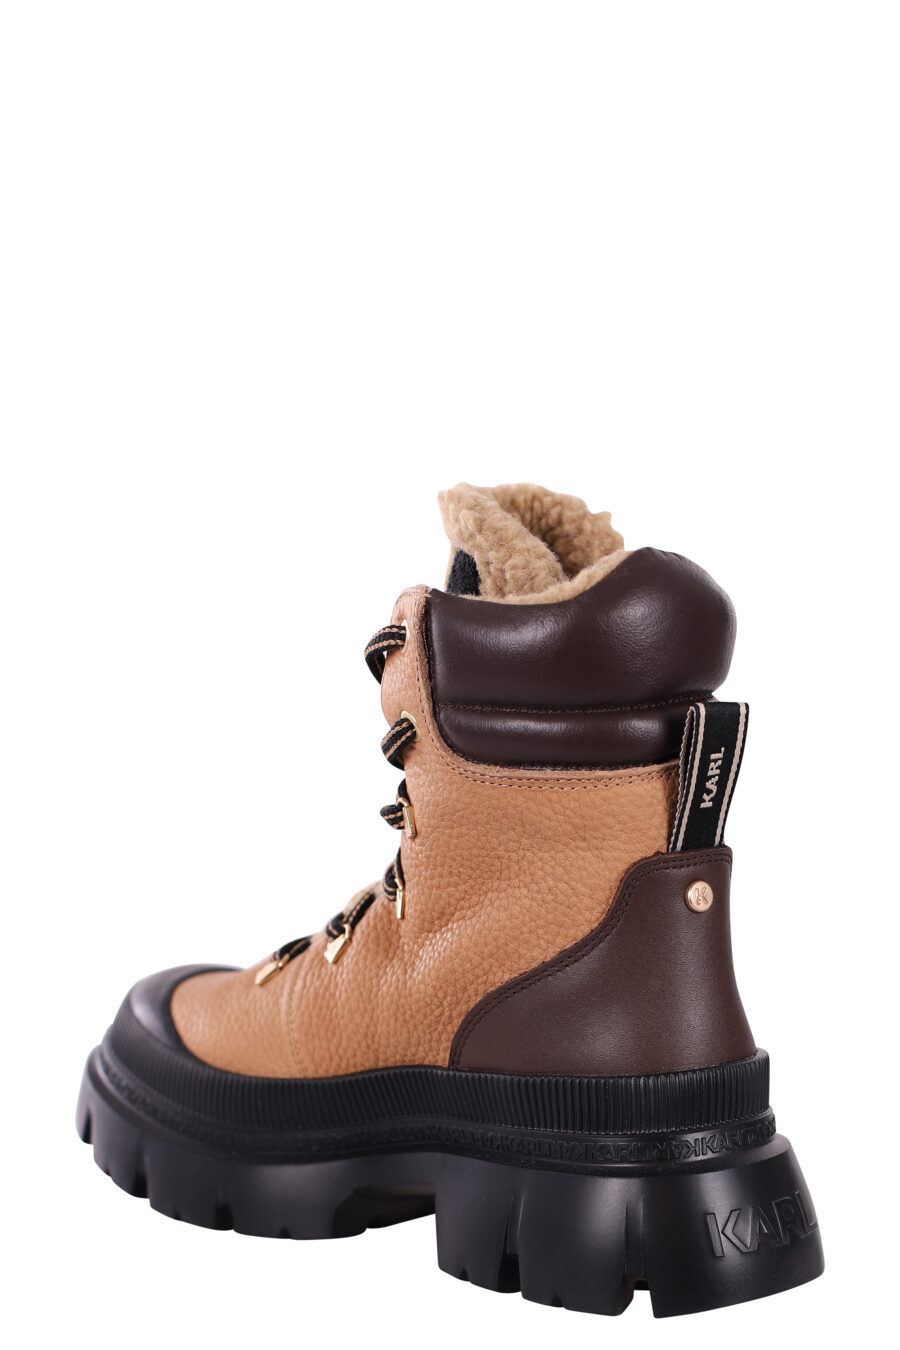 Brown ankle boots with black platform sole - IMG 5873